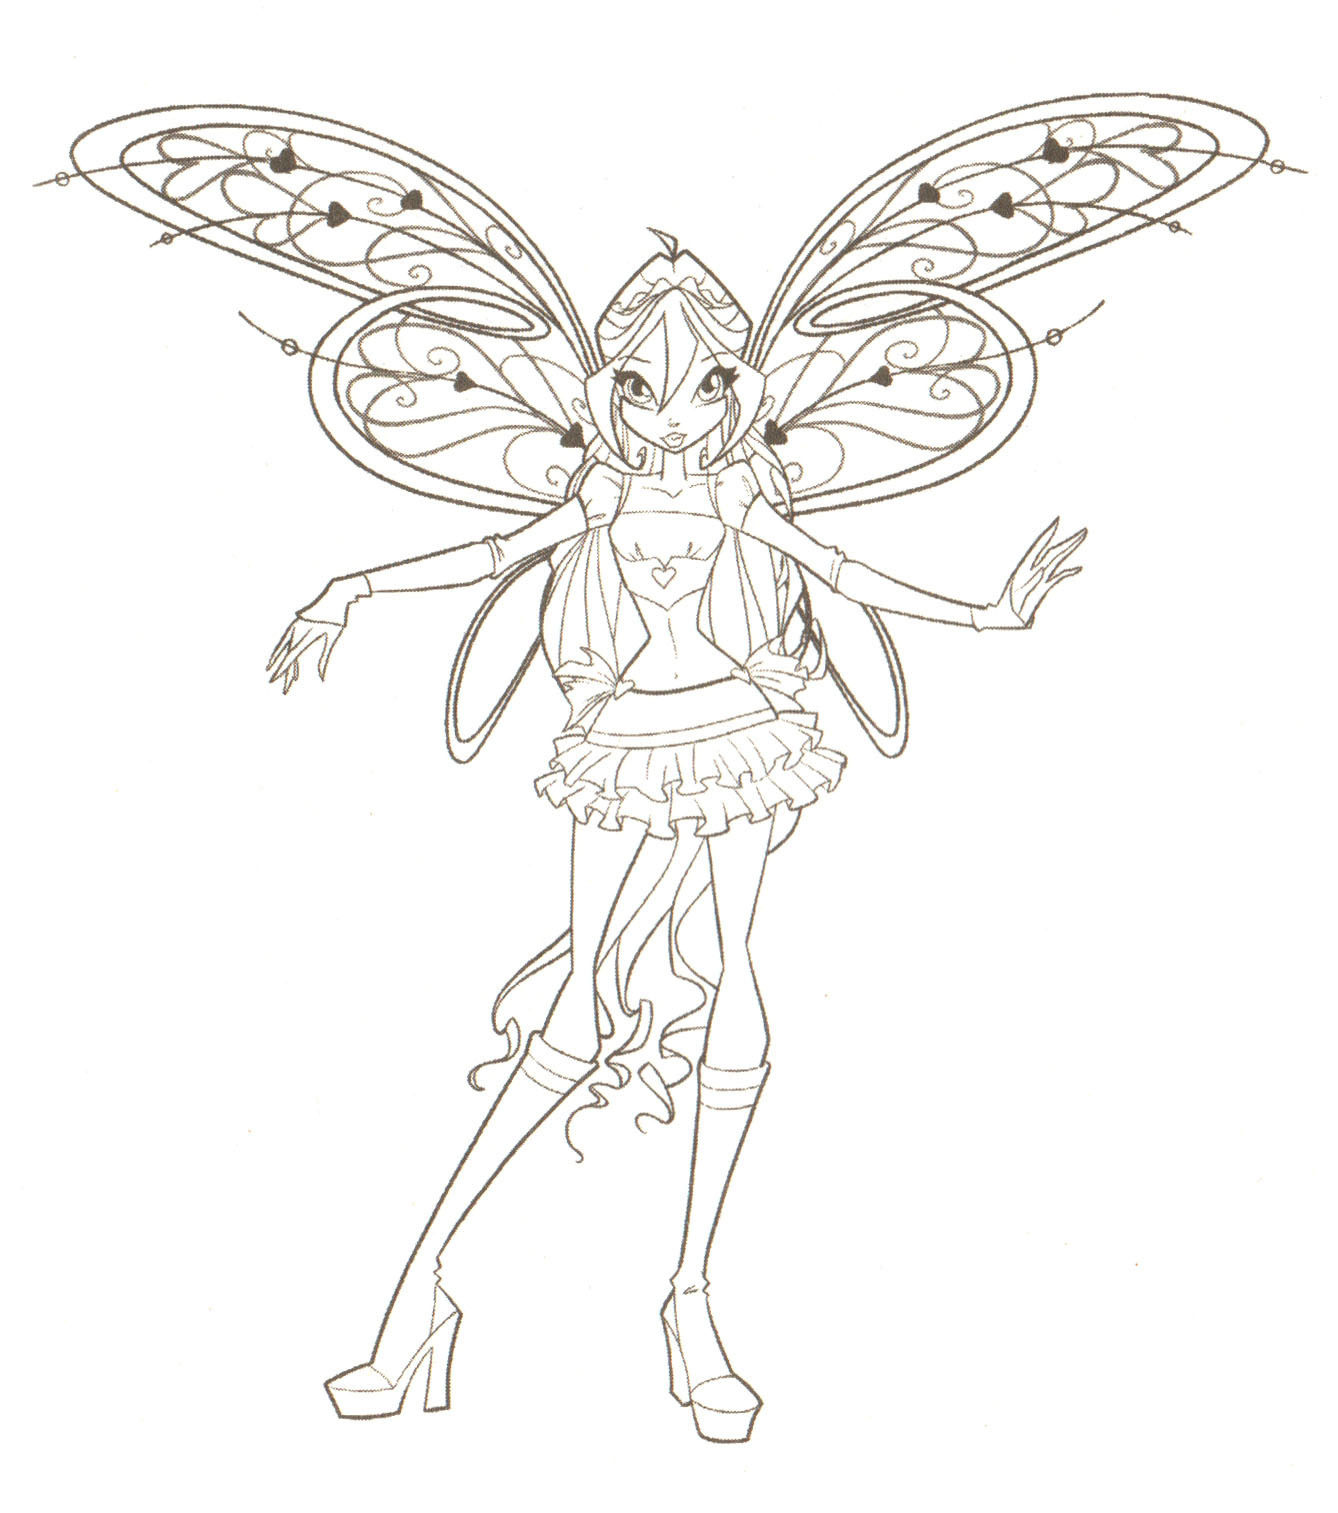  Winx Club Coloring Pages | Hot Winx Club |#13